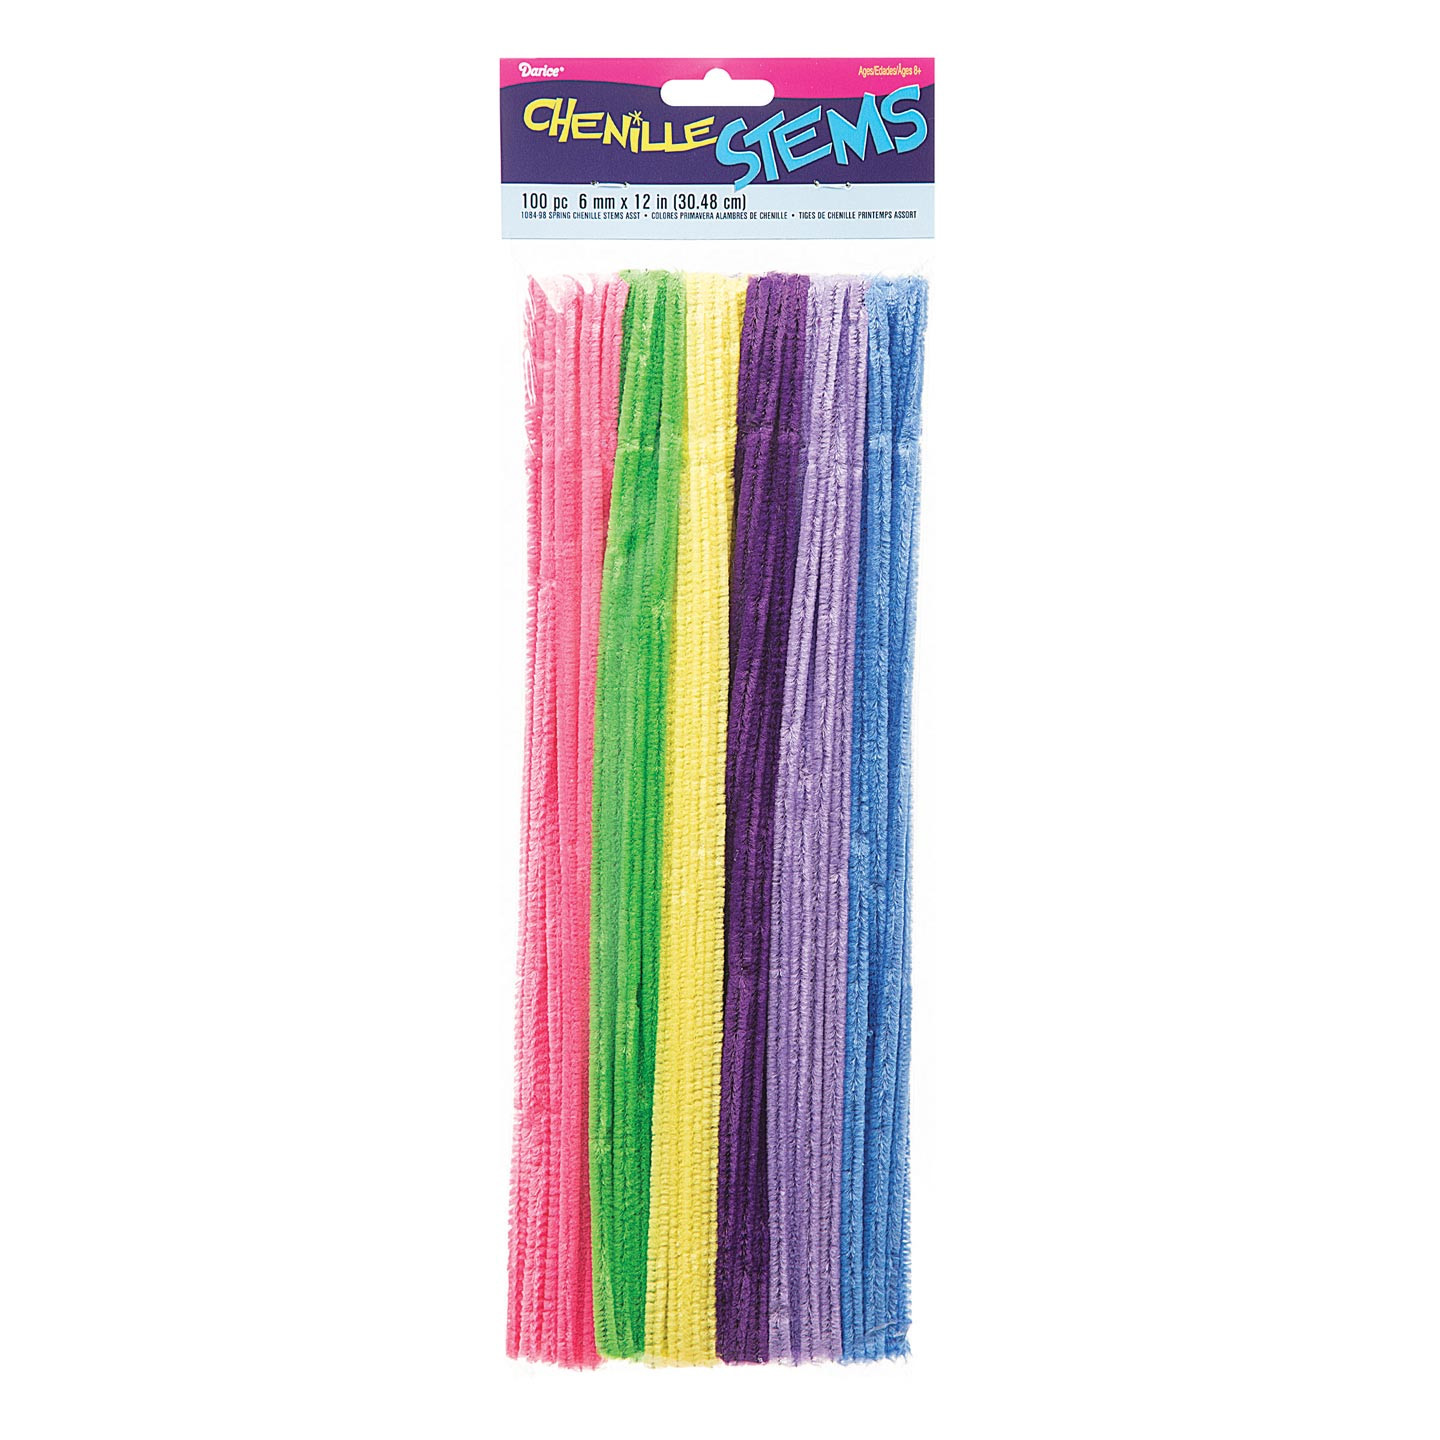 12 Plain Purple Chenille (Pipe Cleaner) 6MM Stems Choose Package Amount  (25)